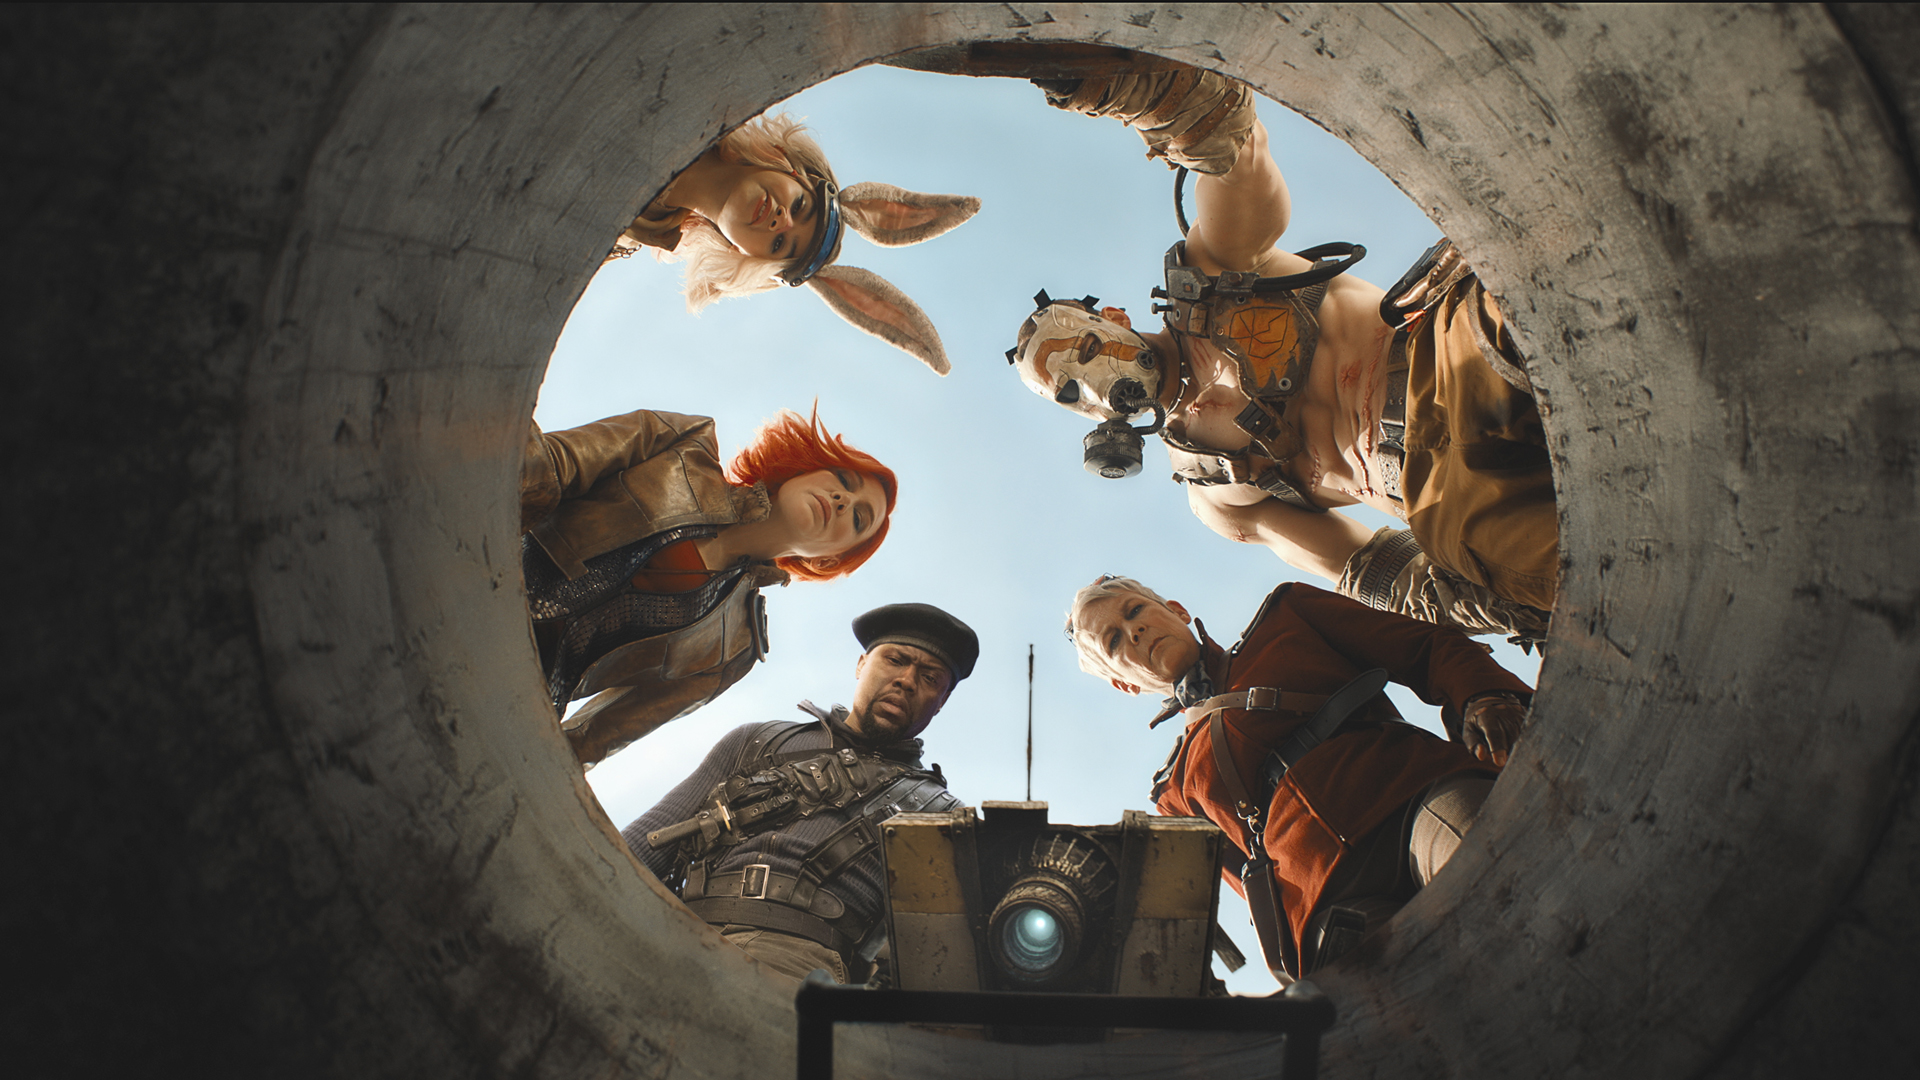 The main characters in Lionsgate's Borderlands movie look down a sewage well